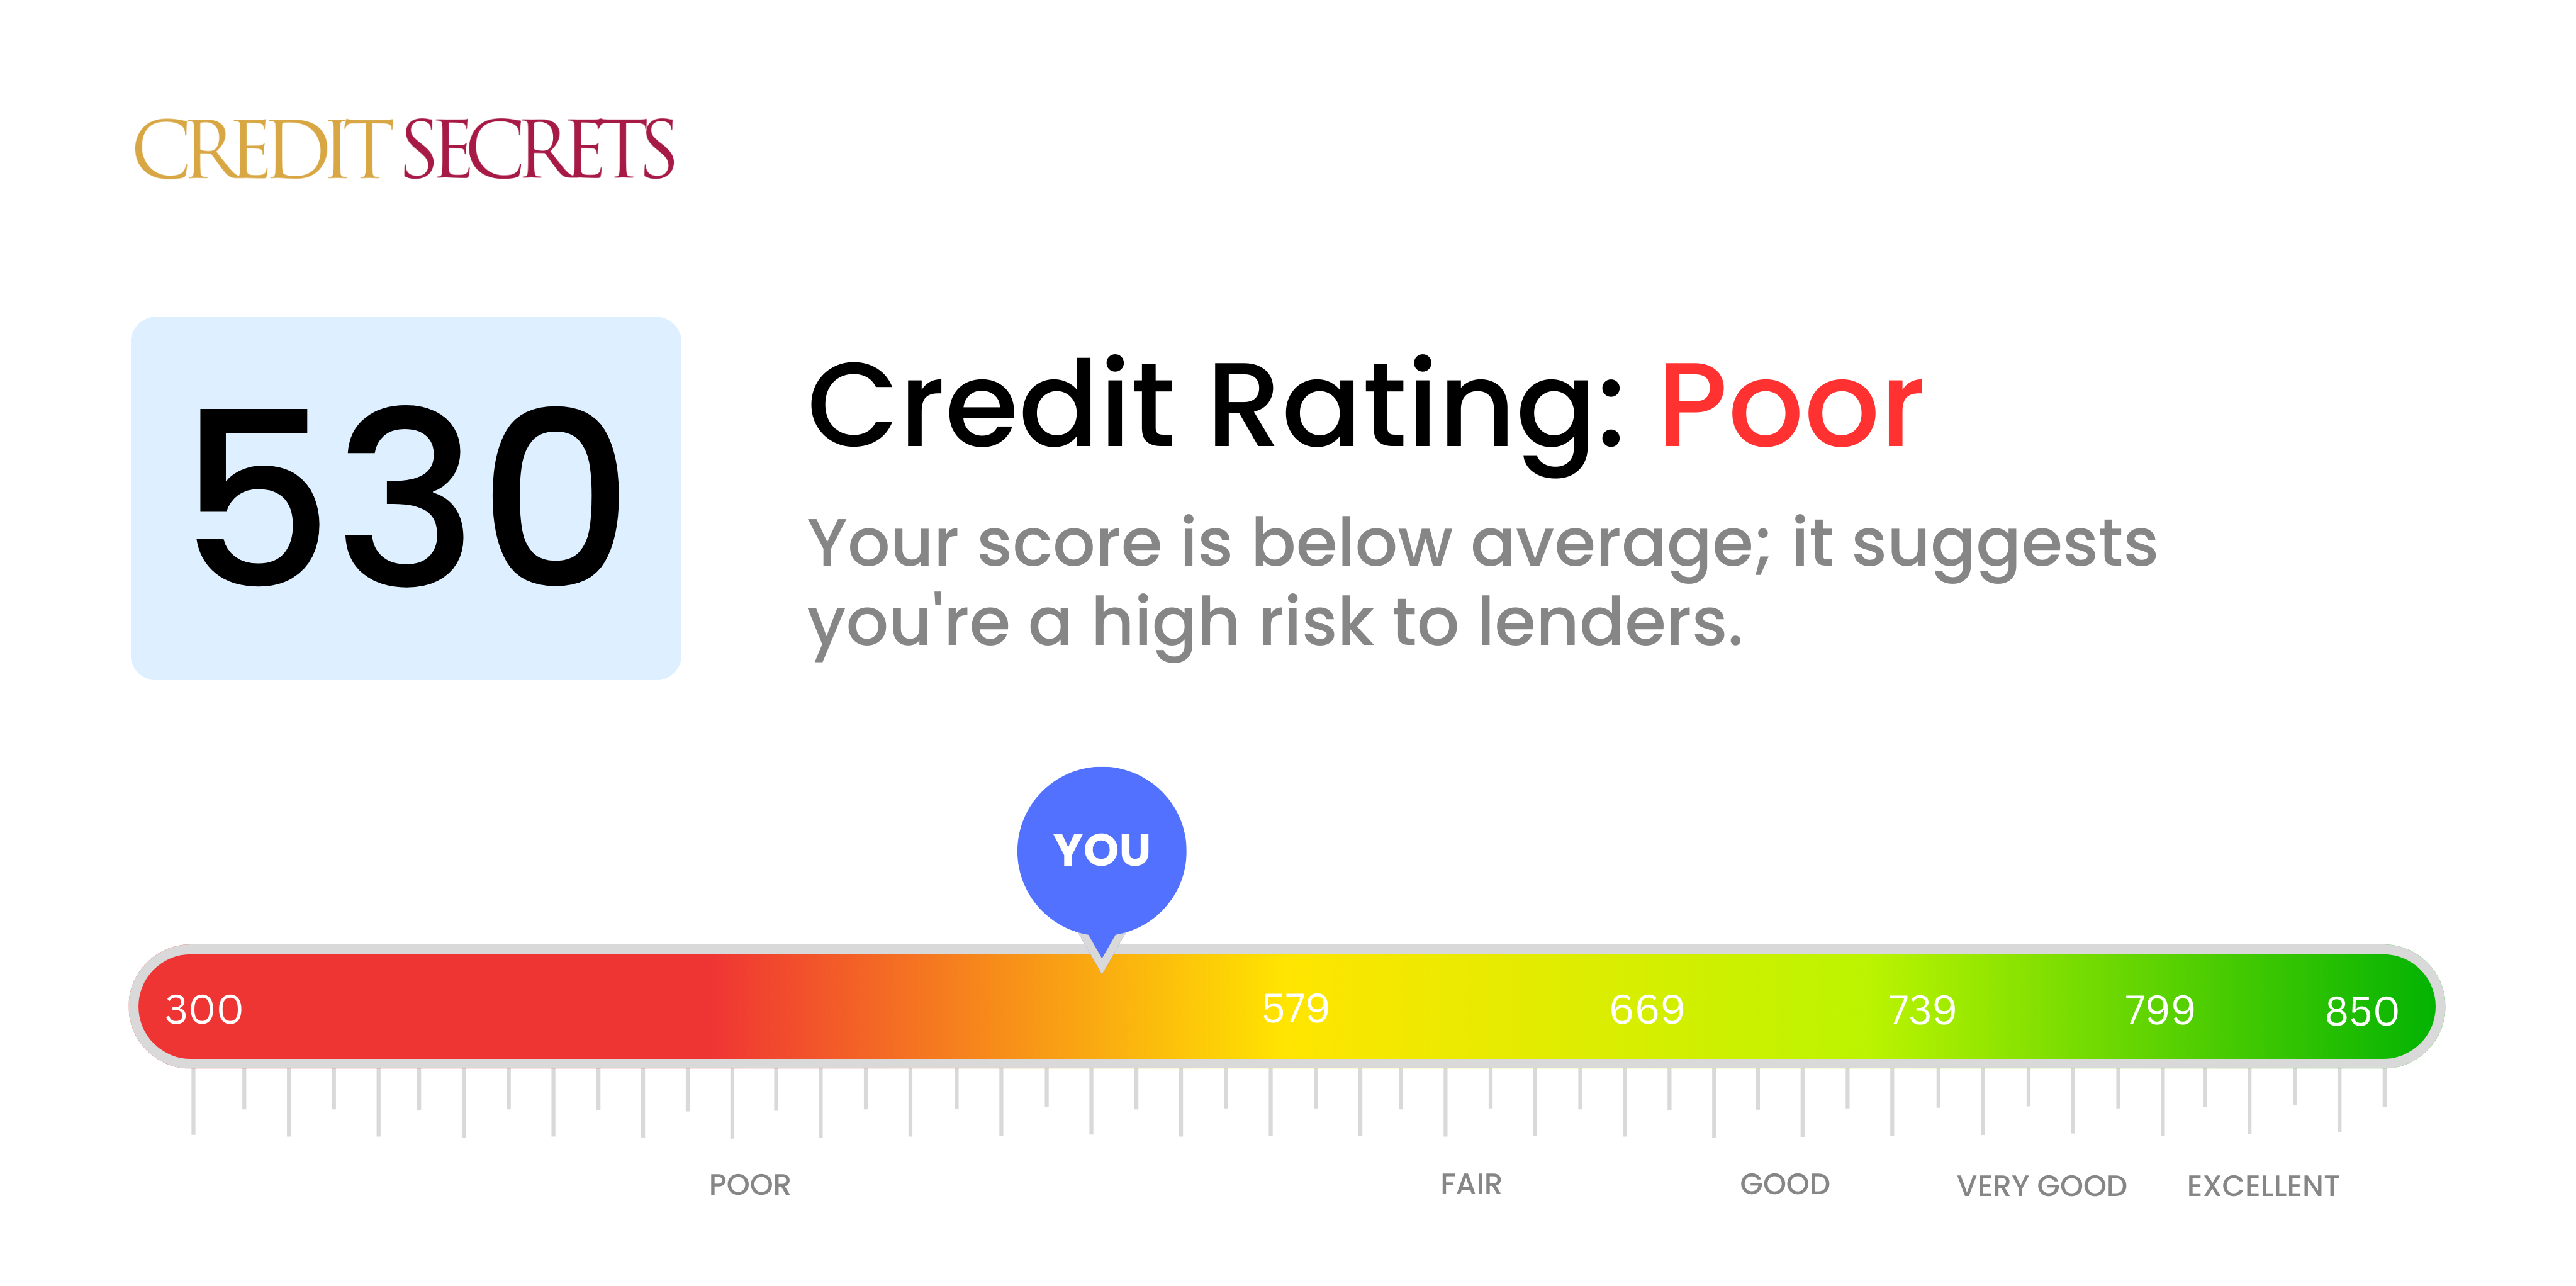 Is 530 a good credit score?